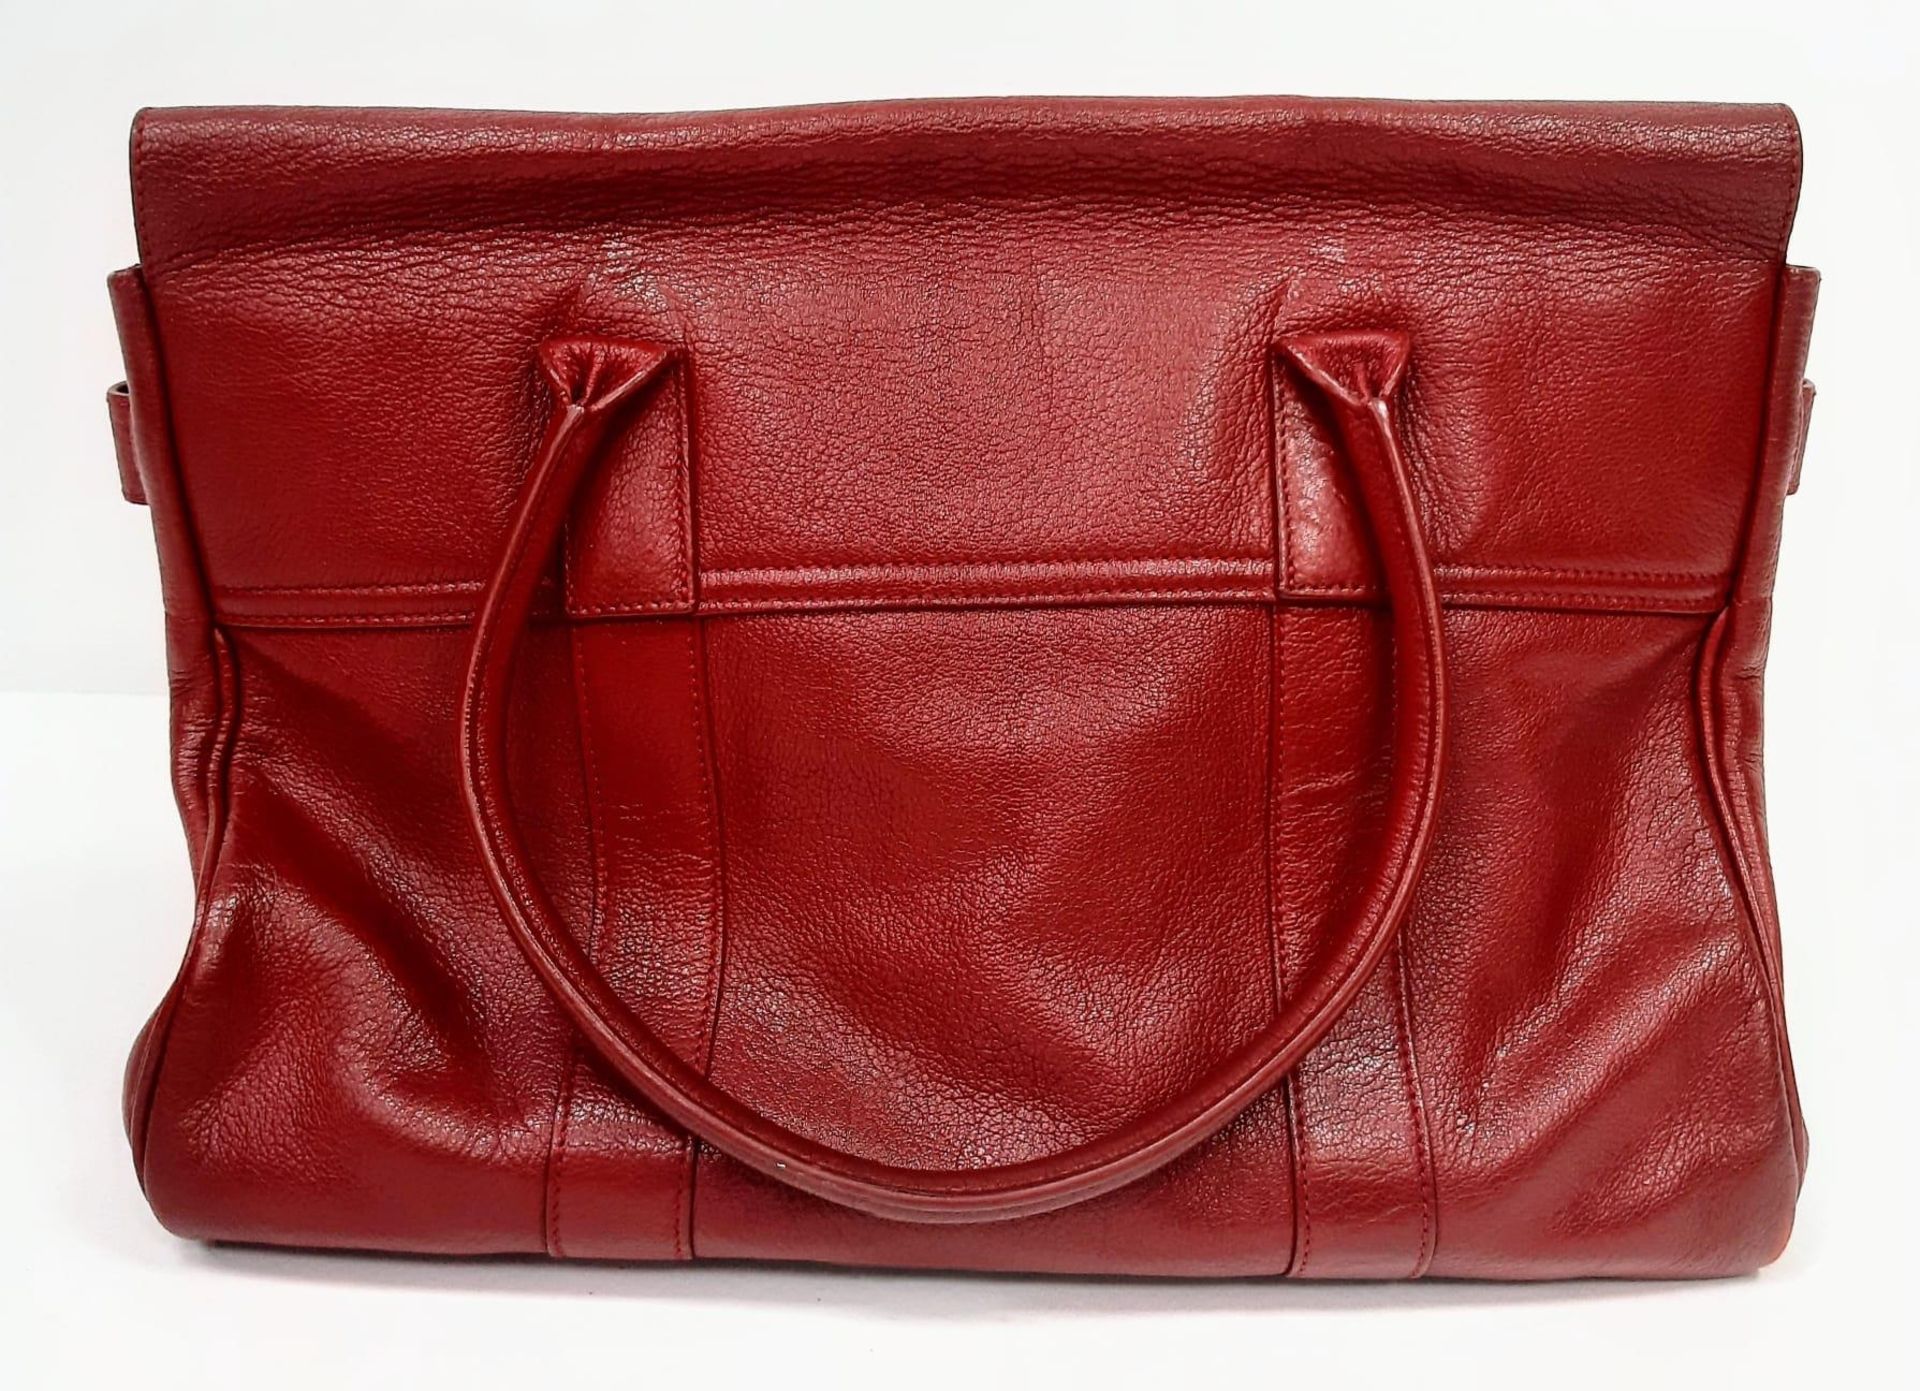 Mulberry Bayswater Red Bag. Classic grain patterning in quality leather. Gold tone hardware. Great - Bild 4 aus 17